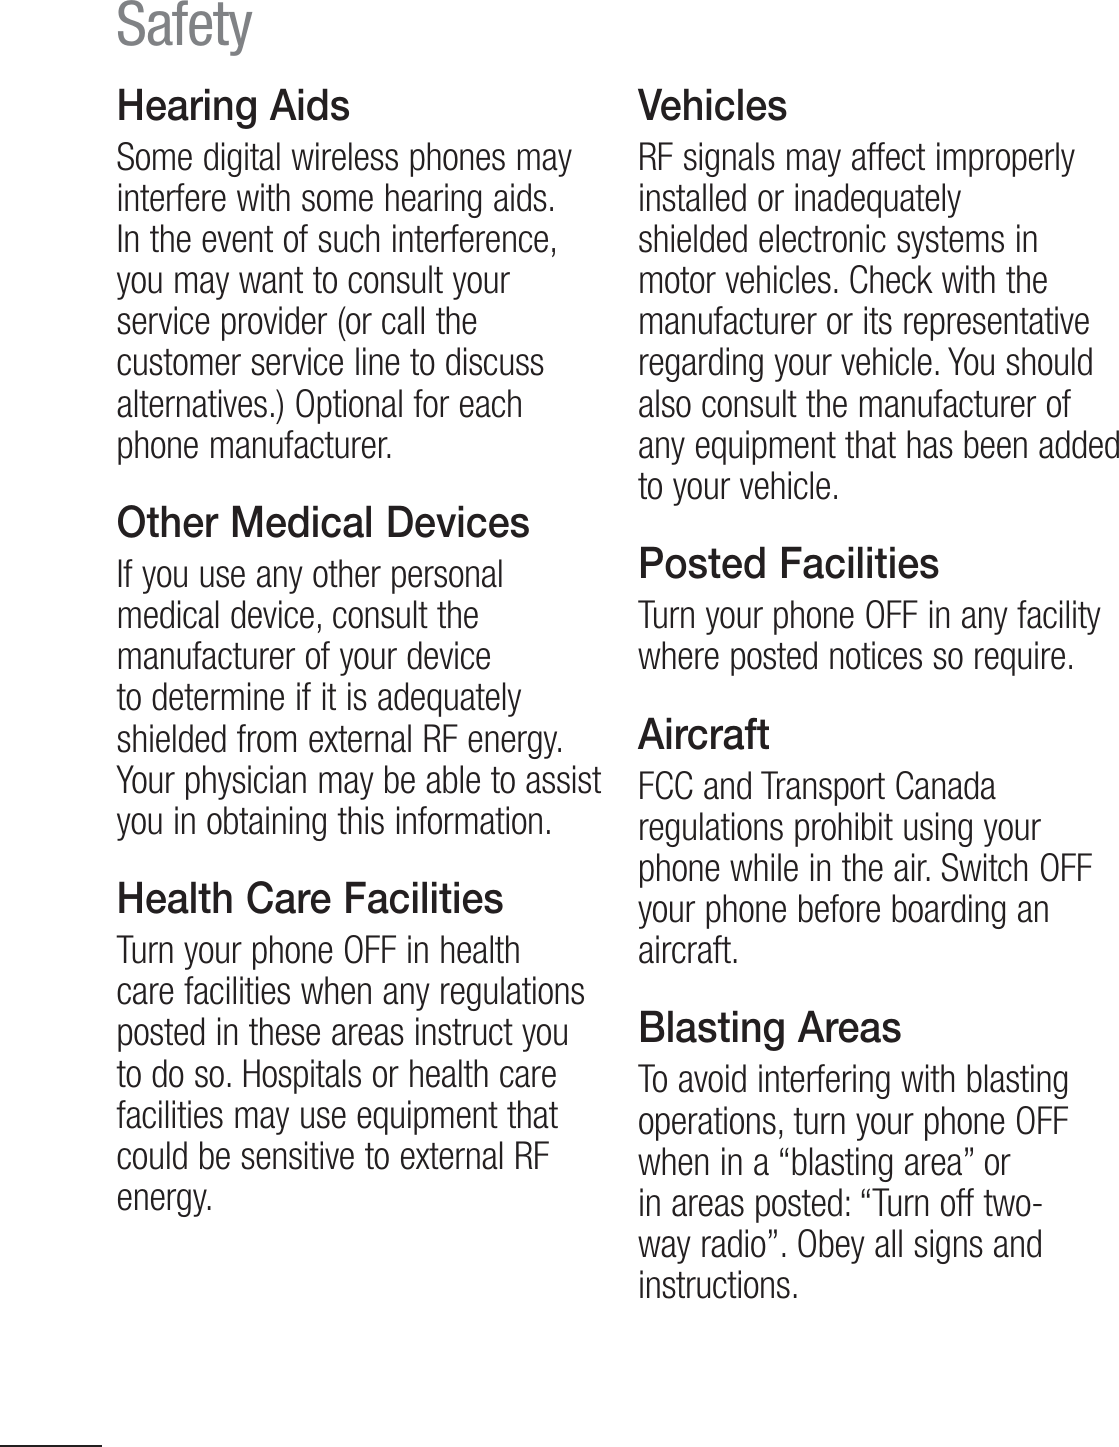 6Hearing AidsSome digital wireless phones may interfere with some hearing aids. In the event of such interference, you may want to consult your service provider (or call the customer service line to discuss alternatives.) Optional for each phone manufacturer.Other Medical DevicesIf you use any other personal medical device, consult the manufacturer of your device to determine if it is adequately shielded from external RF energy. Your physician may be able to assist you in obtaining this information.Health Care FacilitiesTurn your phone OFF in health care facilities when any regulations posted in these areas instruct you UPEPTP)PTQJUBMTPSIFBMUIDBSFfacilities may use equipment that could be sensitive to external RF energy. VehiclesRF signals may affect improperly installed or inadequately shielded electronic systems in motor vehicles. Check with the manufacturer or its representative regarding your vehicle. You should also consult the manufacturer of any equipment that has been added to your vehicle.Posted FacilitiesTurn your phone OFF in any facility where posted notices so require.AircraftFCC and Transport Canada regulations prohibit using your phone while in the air. Switch OFF your phone before boarding an aircraft.Blasting AreasTo avoid interfering with blasting operations, turn your phone OFF when in a “blasting area” or in areas posted: “Turn off two-way radio”. Obey all signs and instructions.Safety